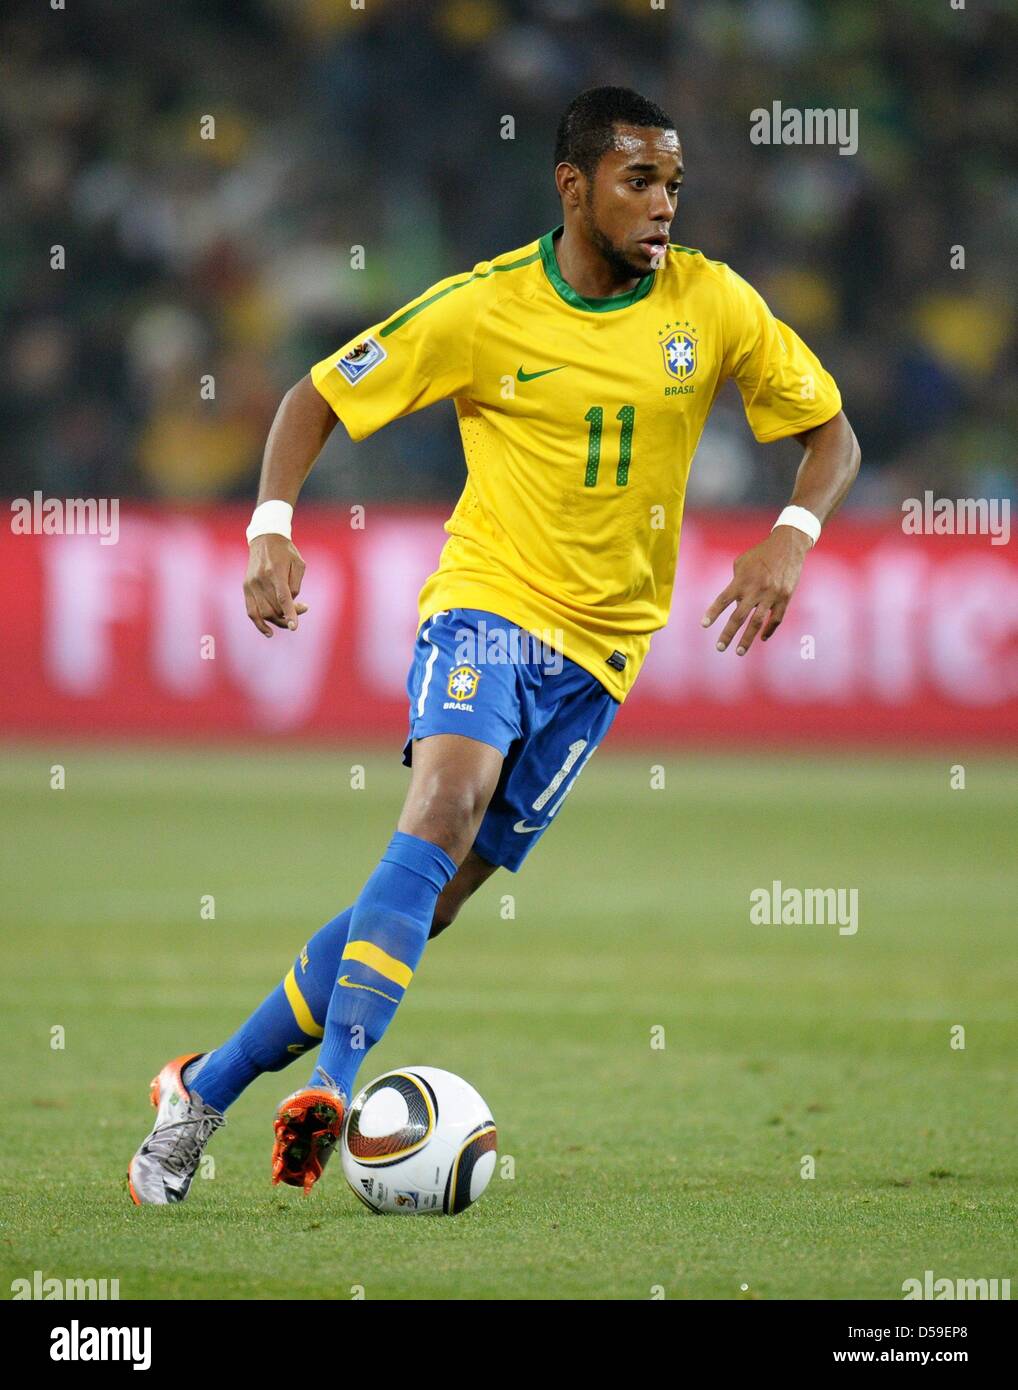 Robinho of Brazil controls the ball during the FIFA World Cup 2010 group G  match between Brazil and Ivory Coast at the Soccer City Stadium in  Johannesburg, South Africa 20 June 2010.